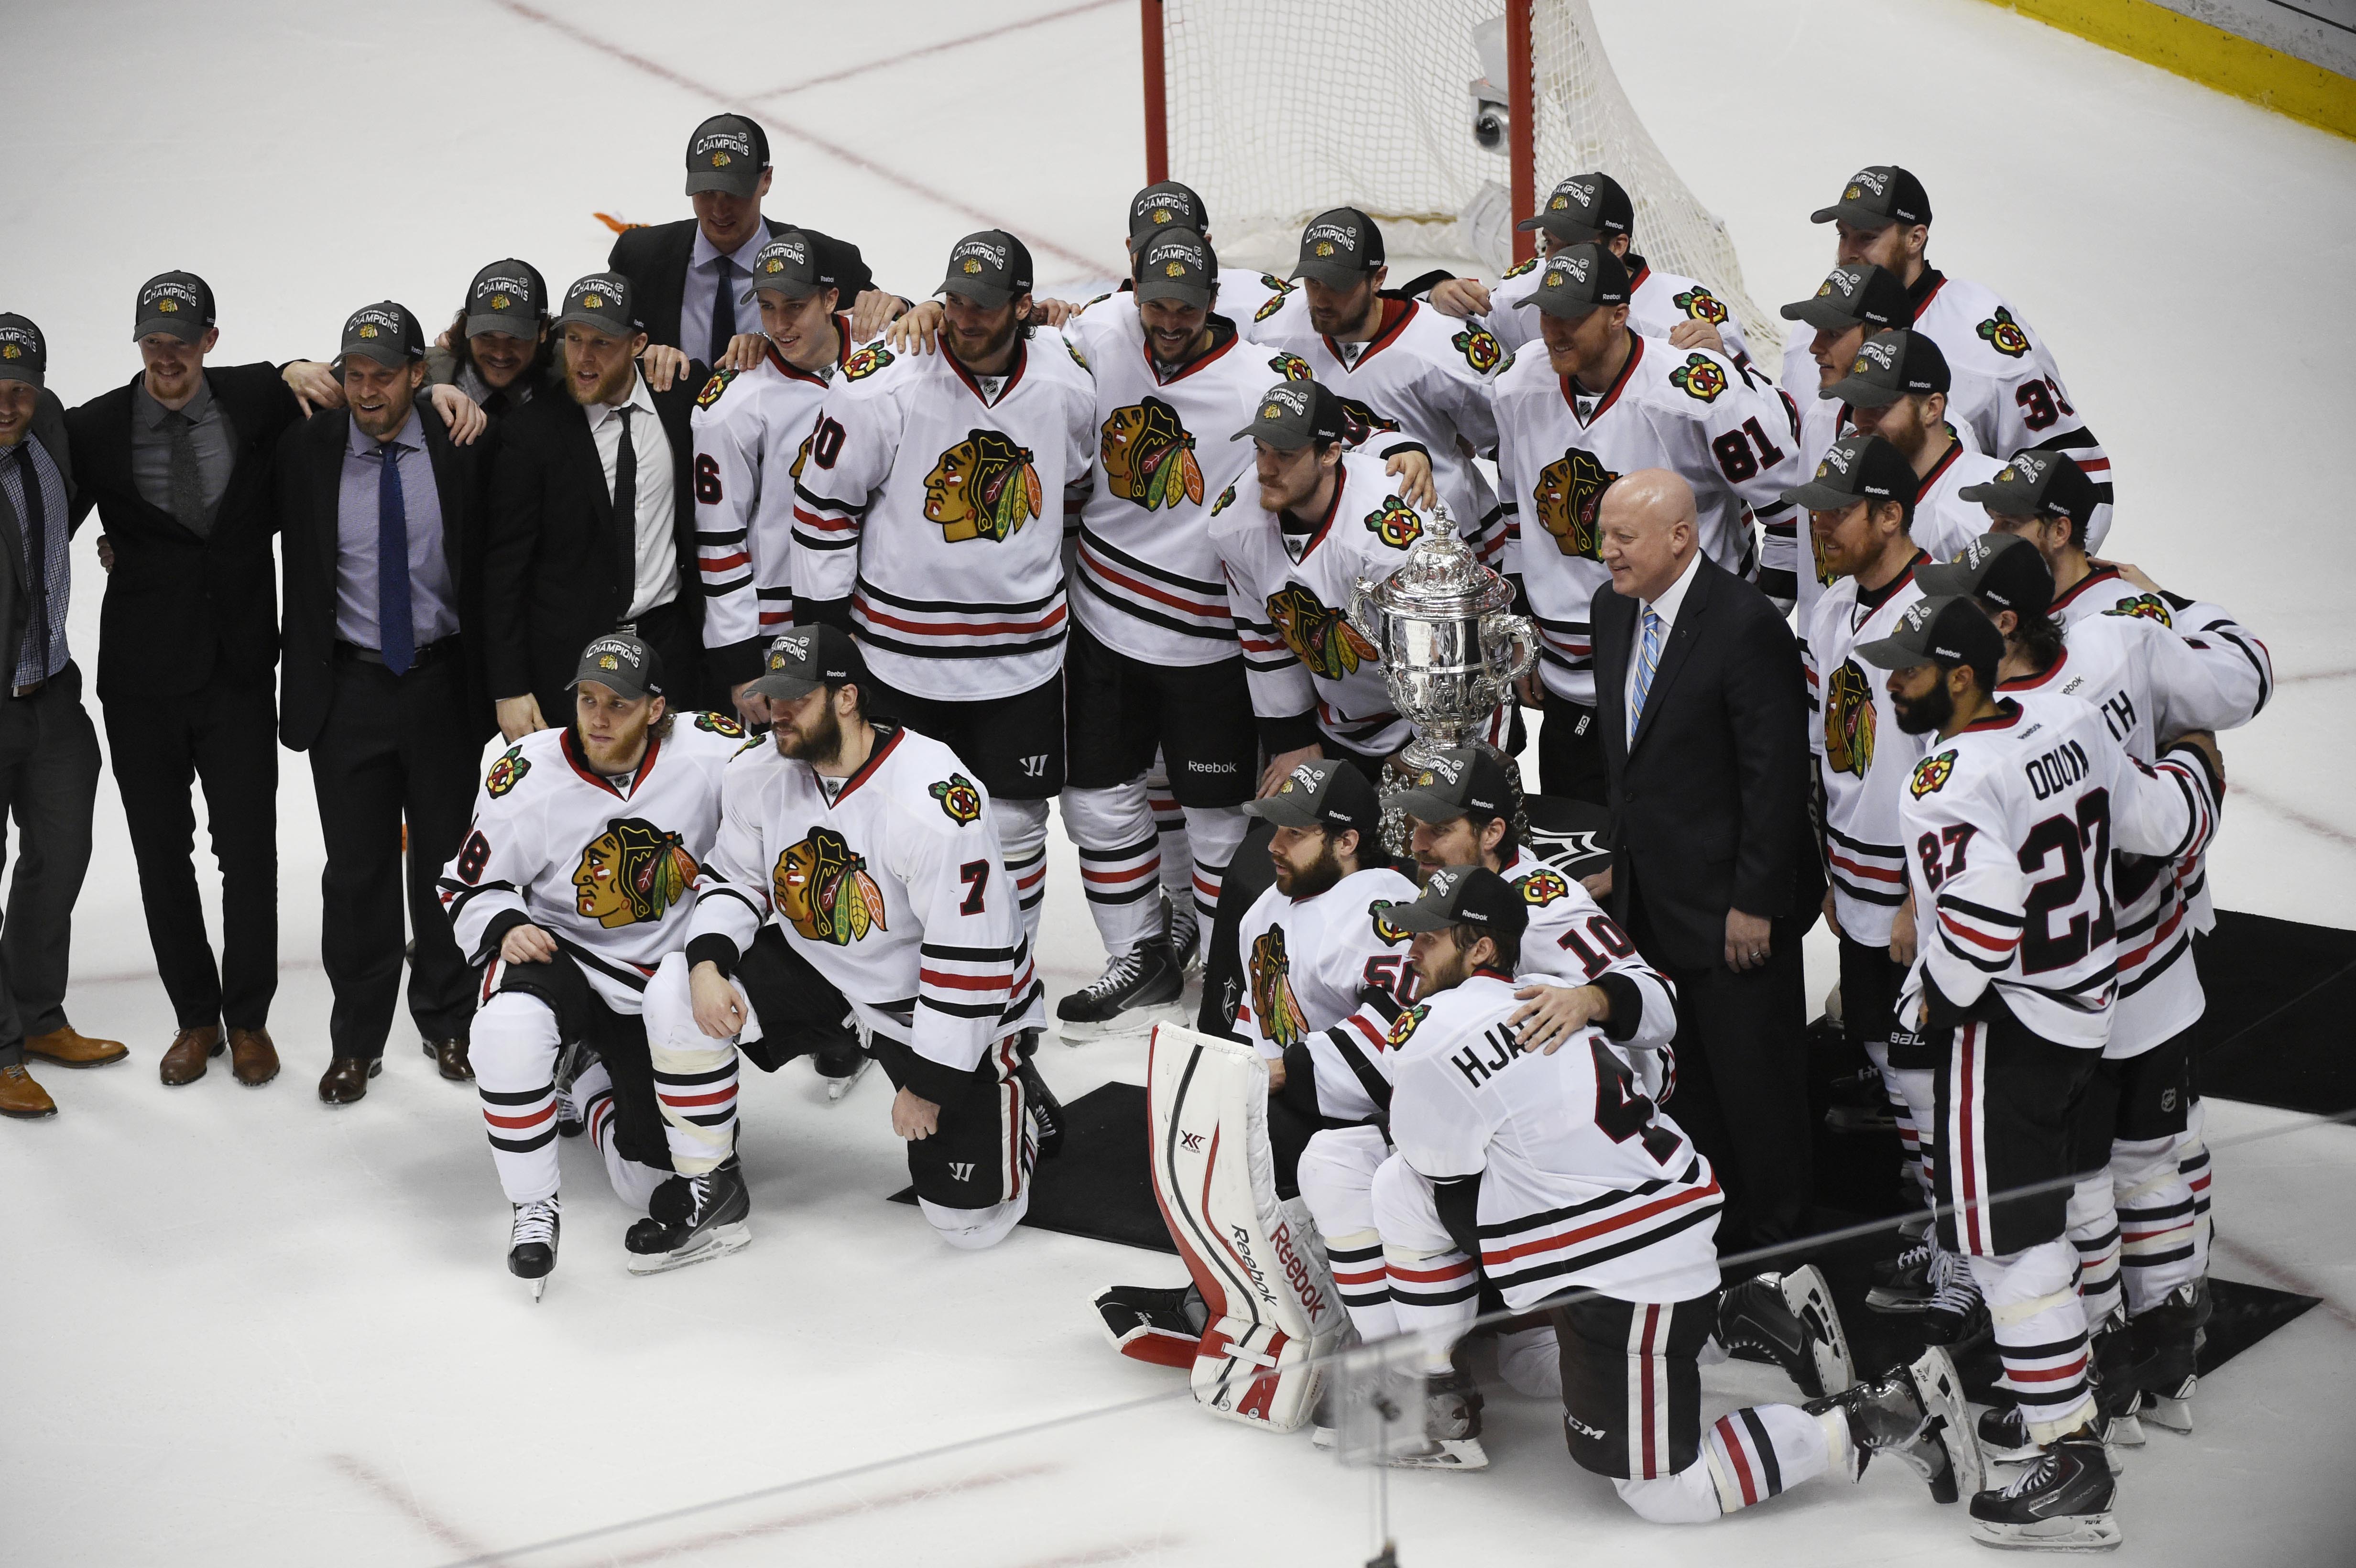 Why didn't the Blackhawks win the Stanley Cup in 2009?